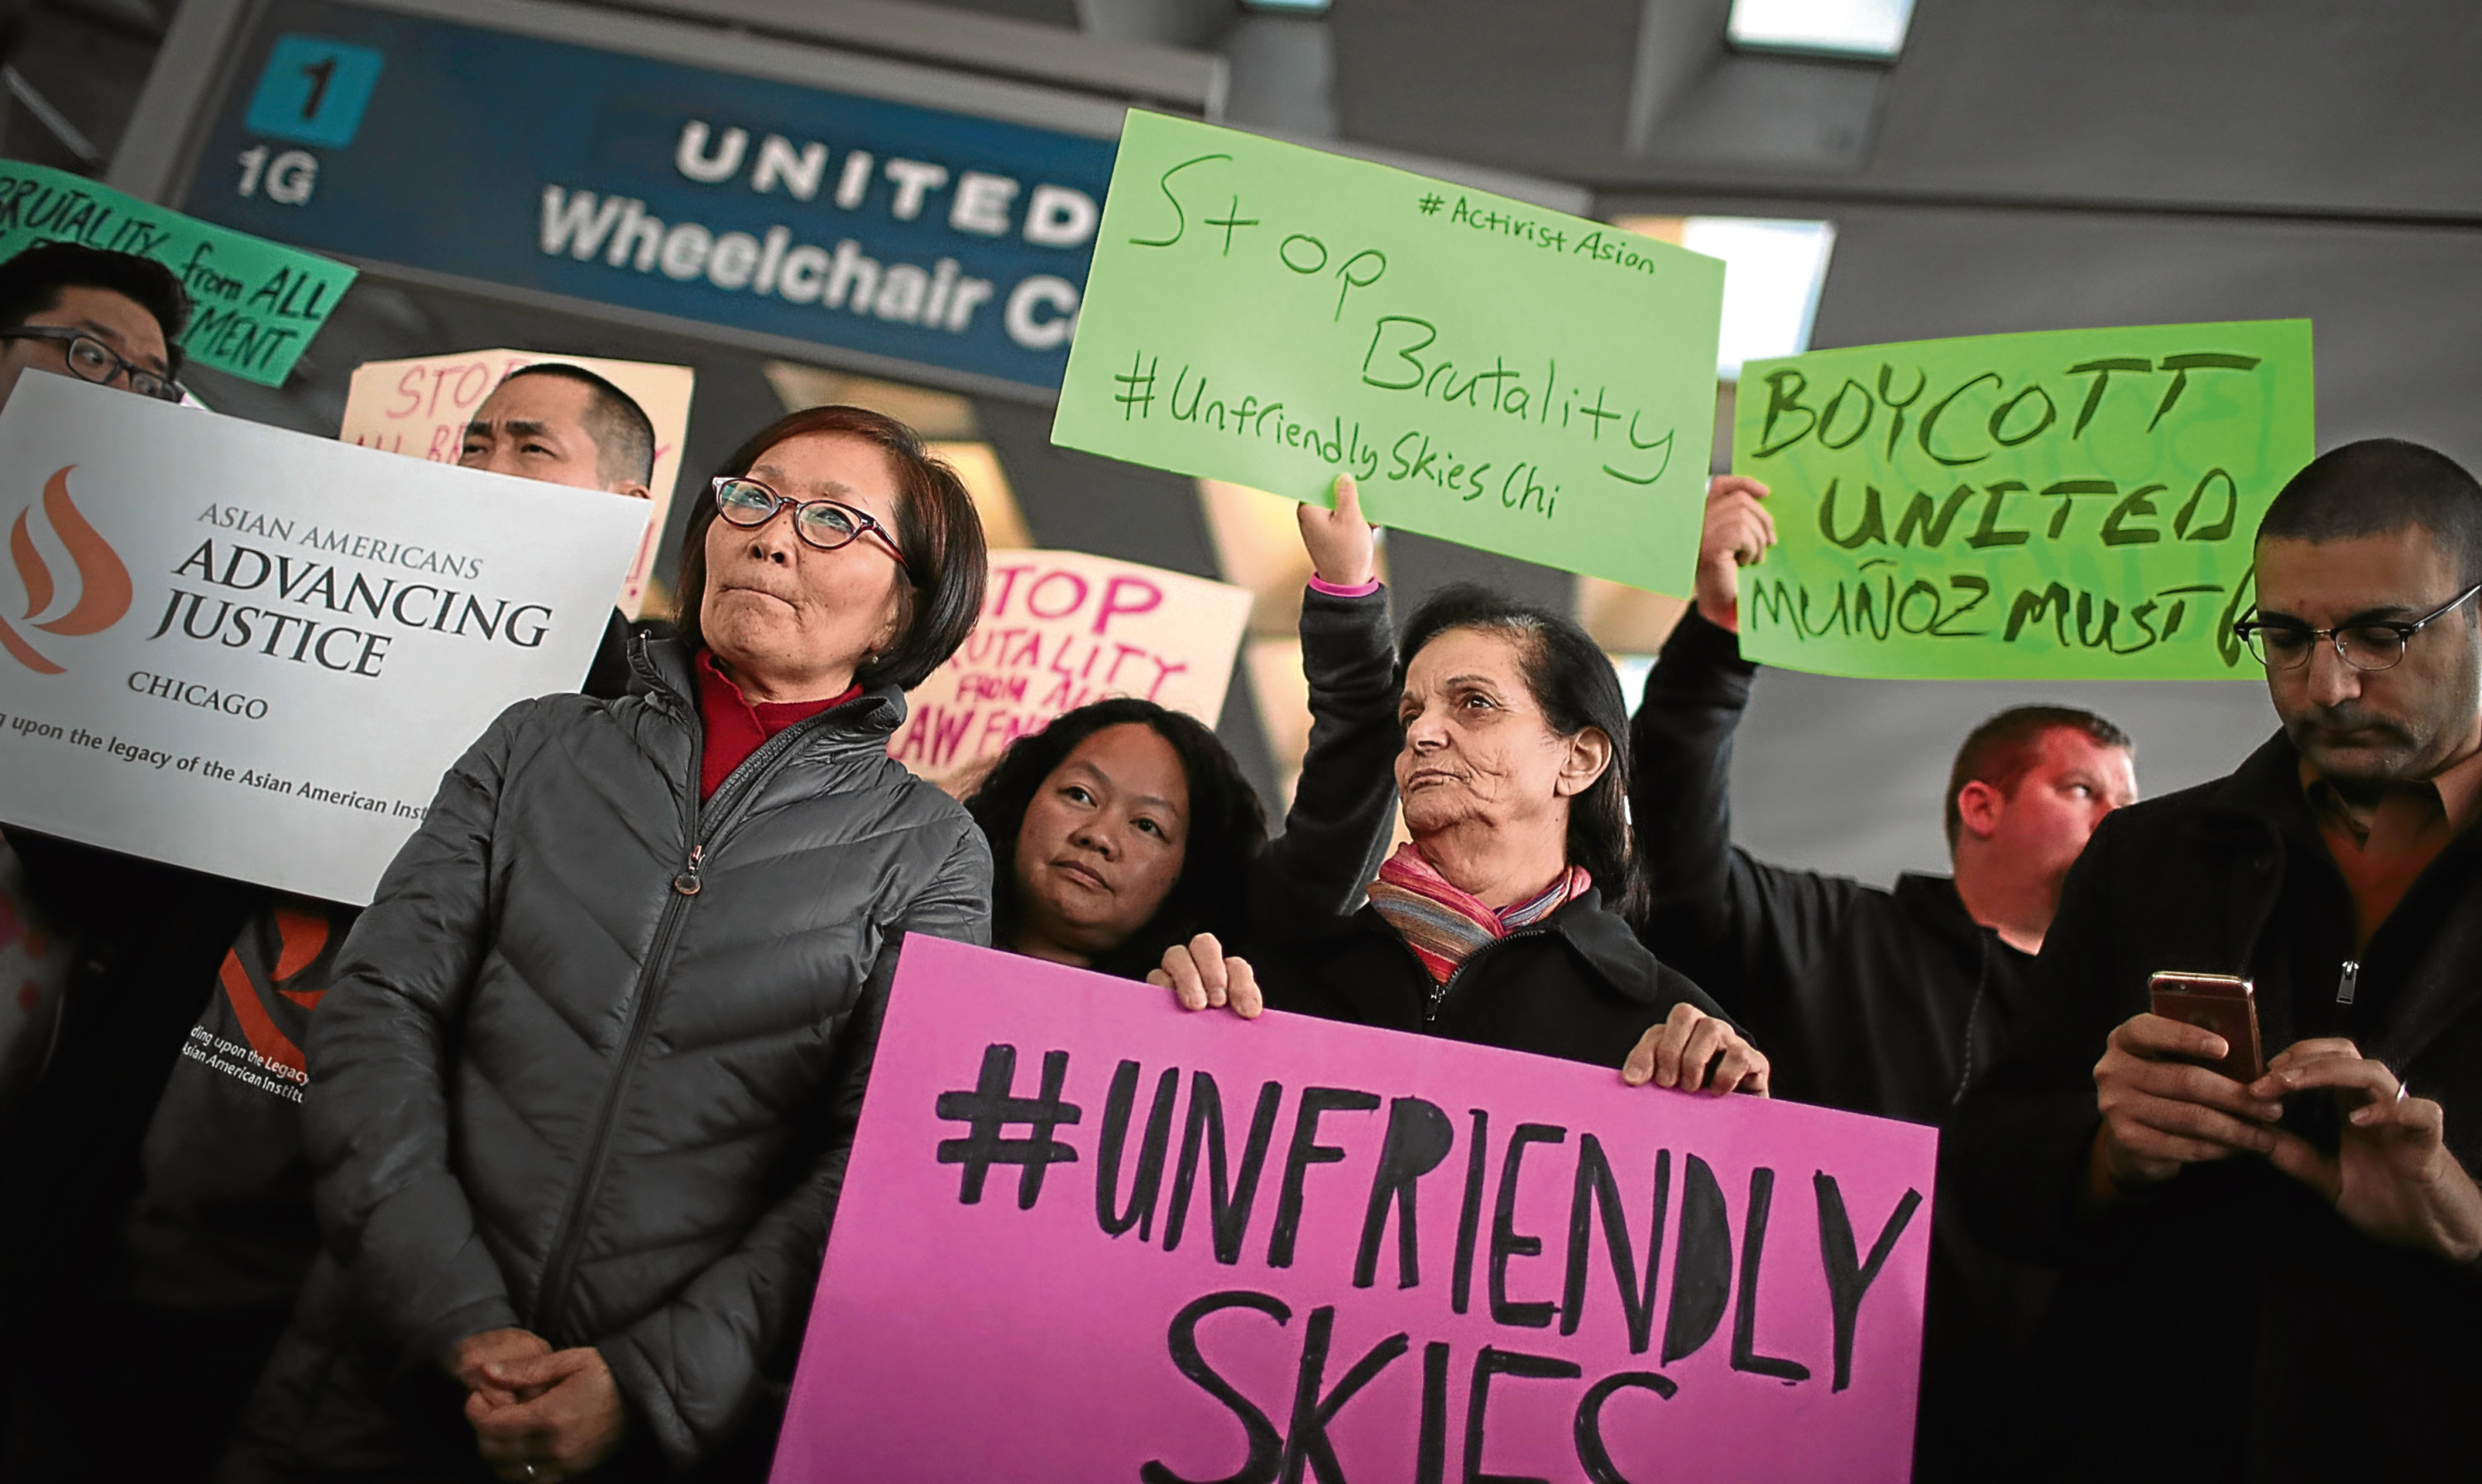 United Airlines treatment of a passenger sparked protests